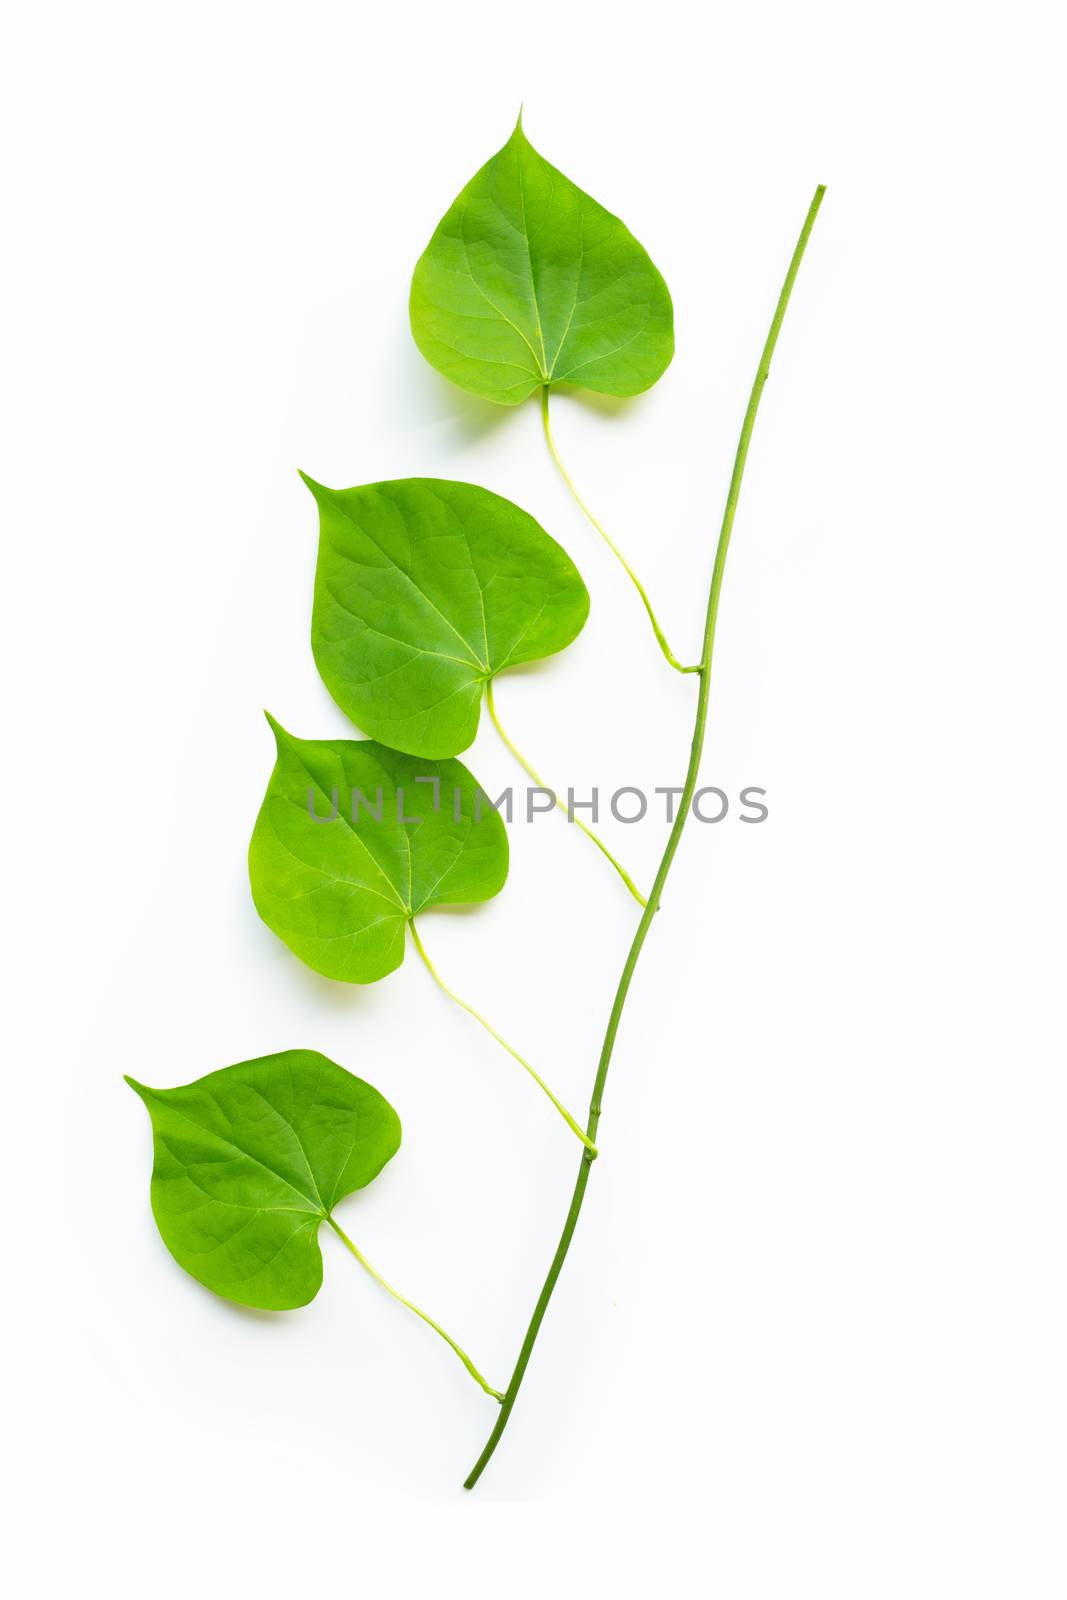 Green leaves heart shaped on white. by Bowonpat